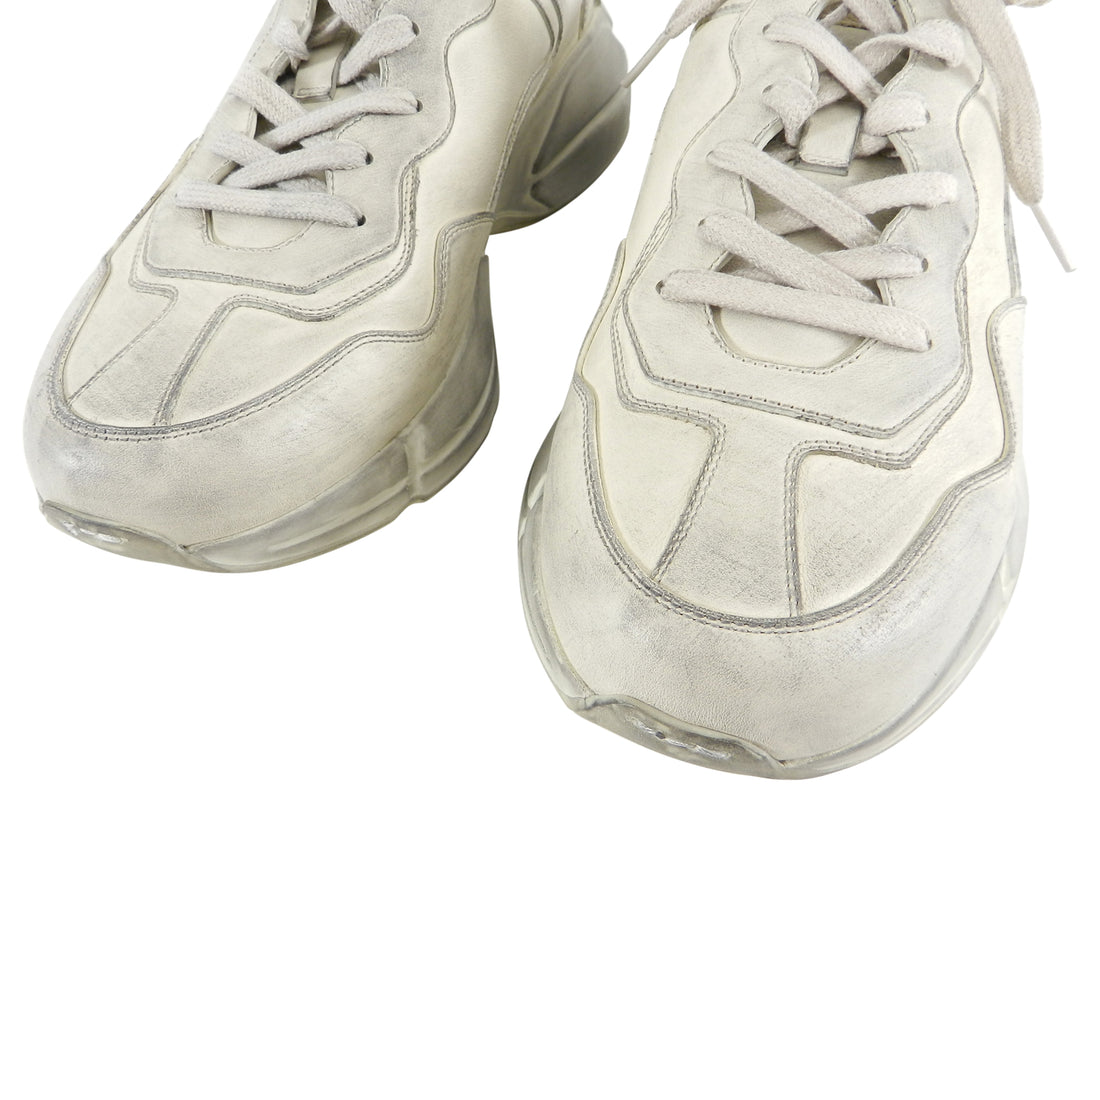 Gucci Distressed Leather Rhyton Sneakers - 11